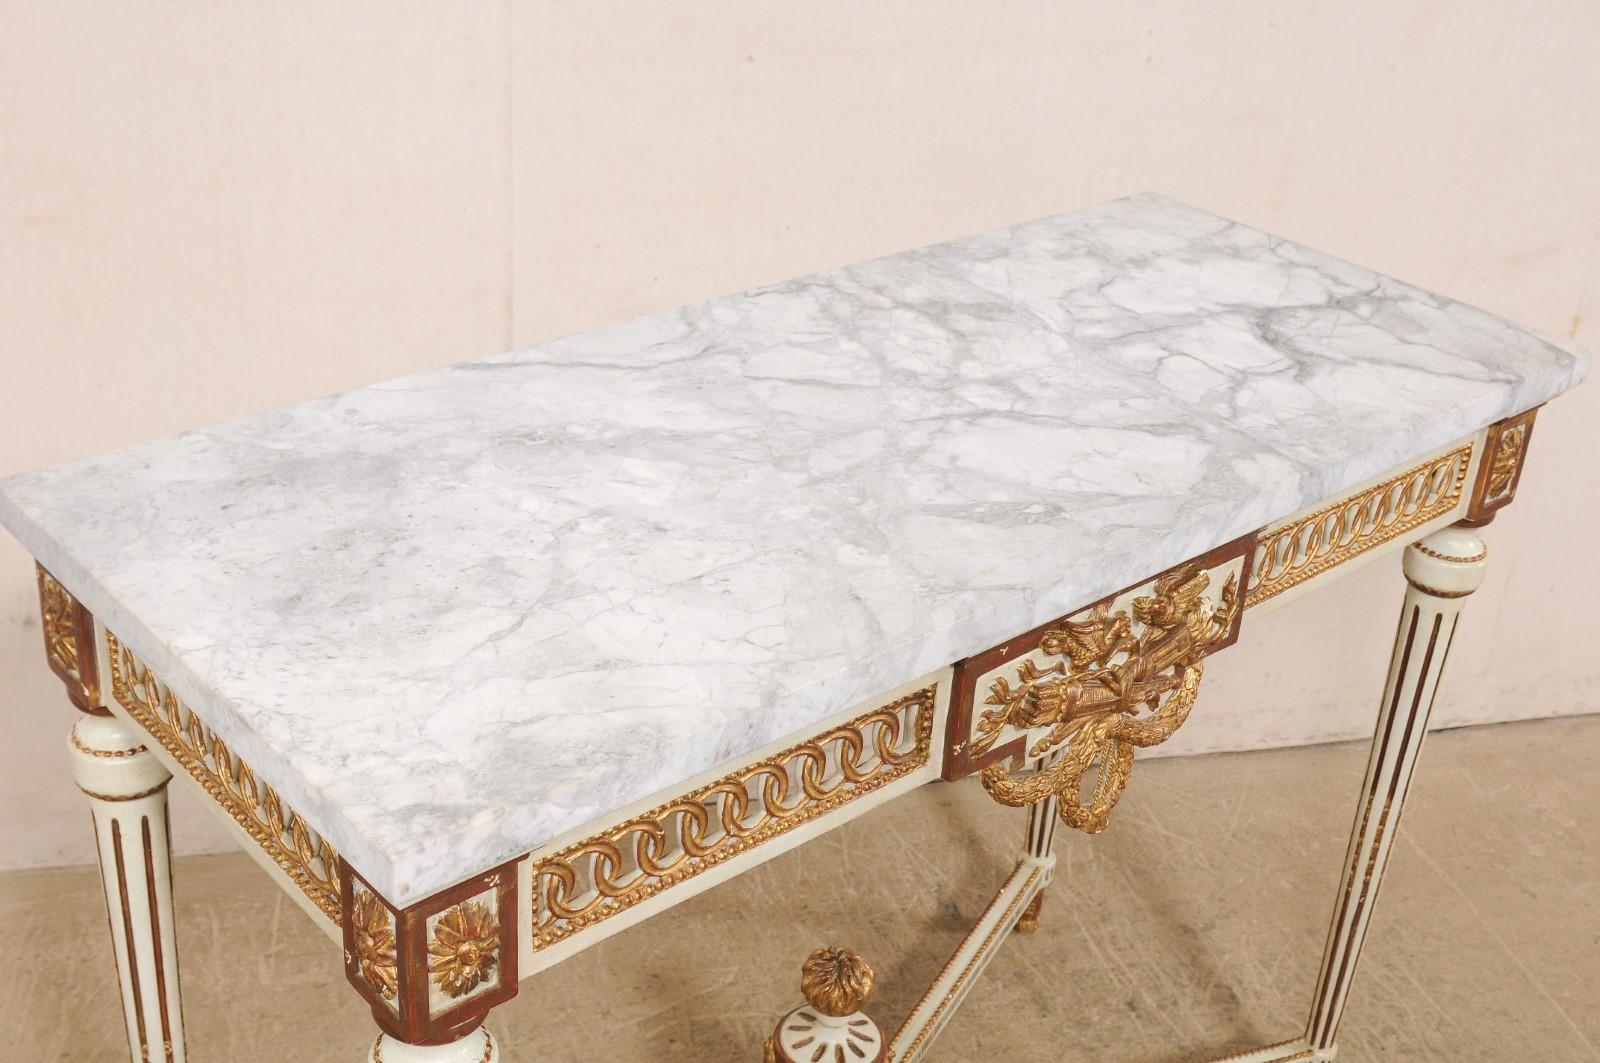 Italian Marble Top Console w/Pierce-Carved Apron & Large Urn Finial at Underside For Sale 1